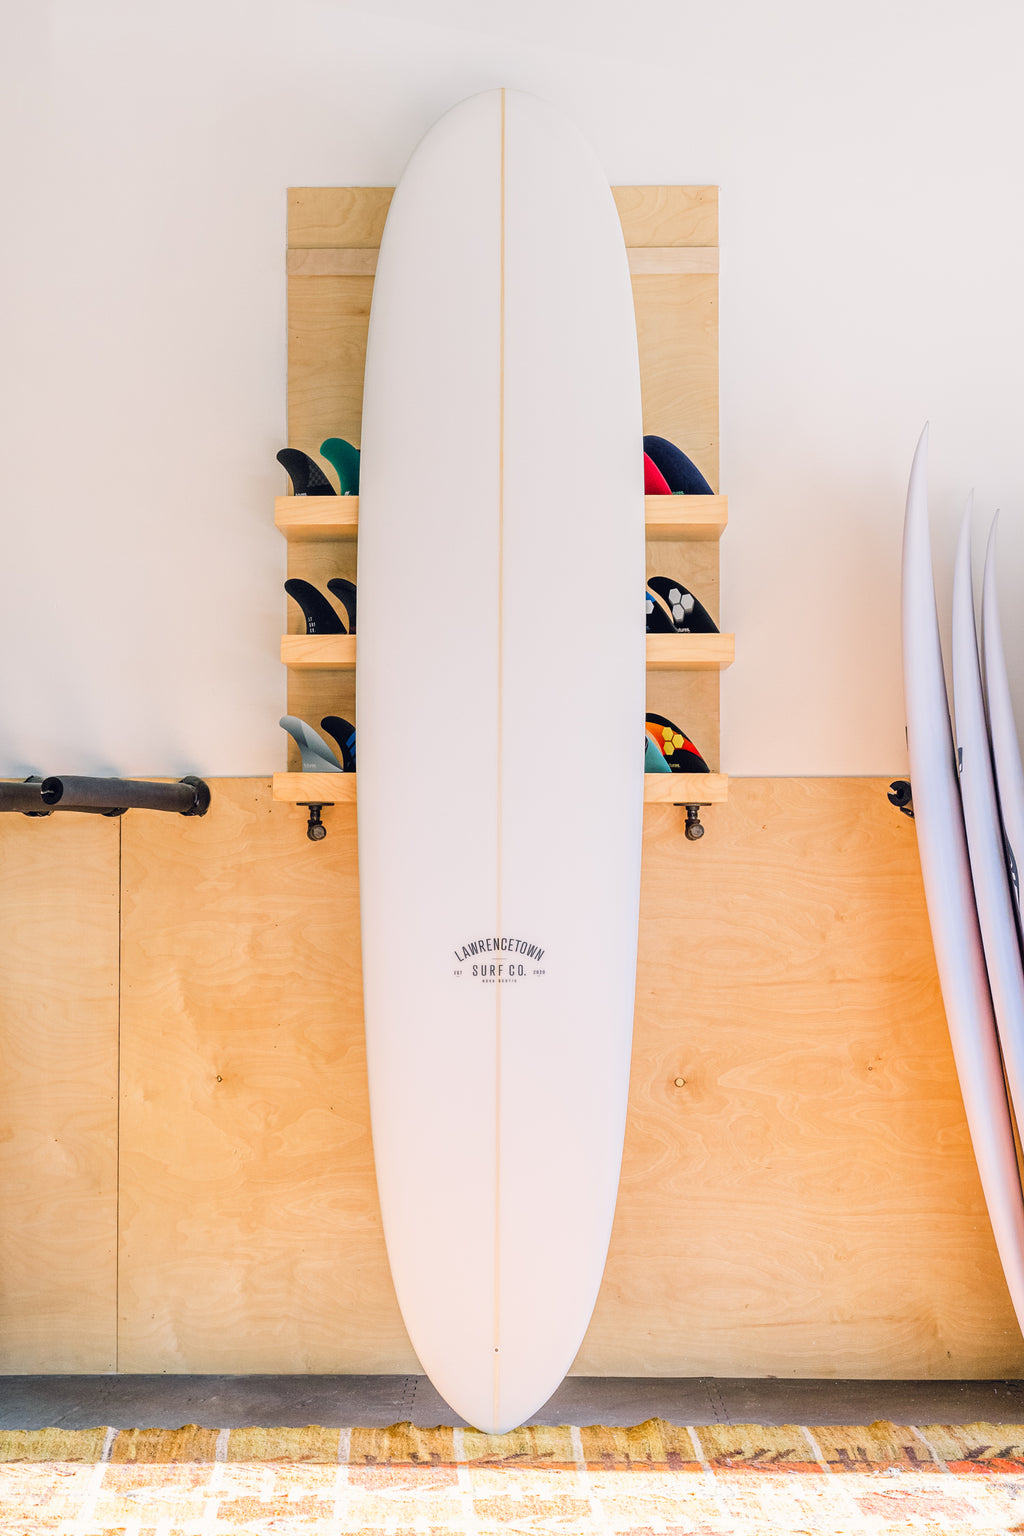 Lawrencetown Surf Co. Round Pin Longboard - 8'4"